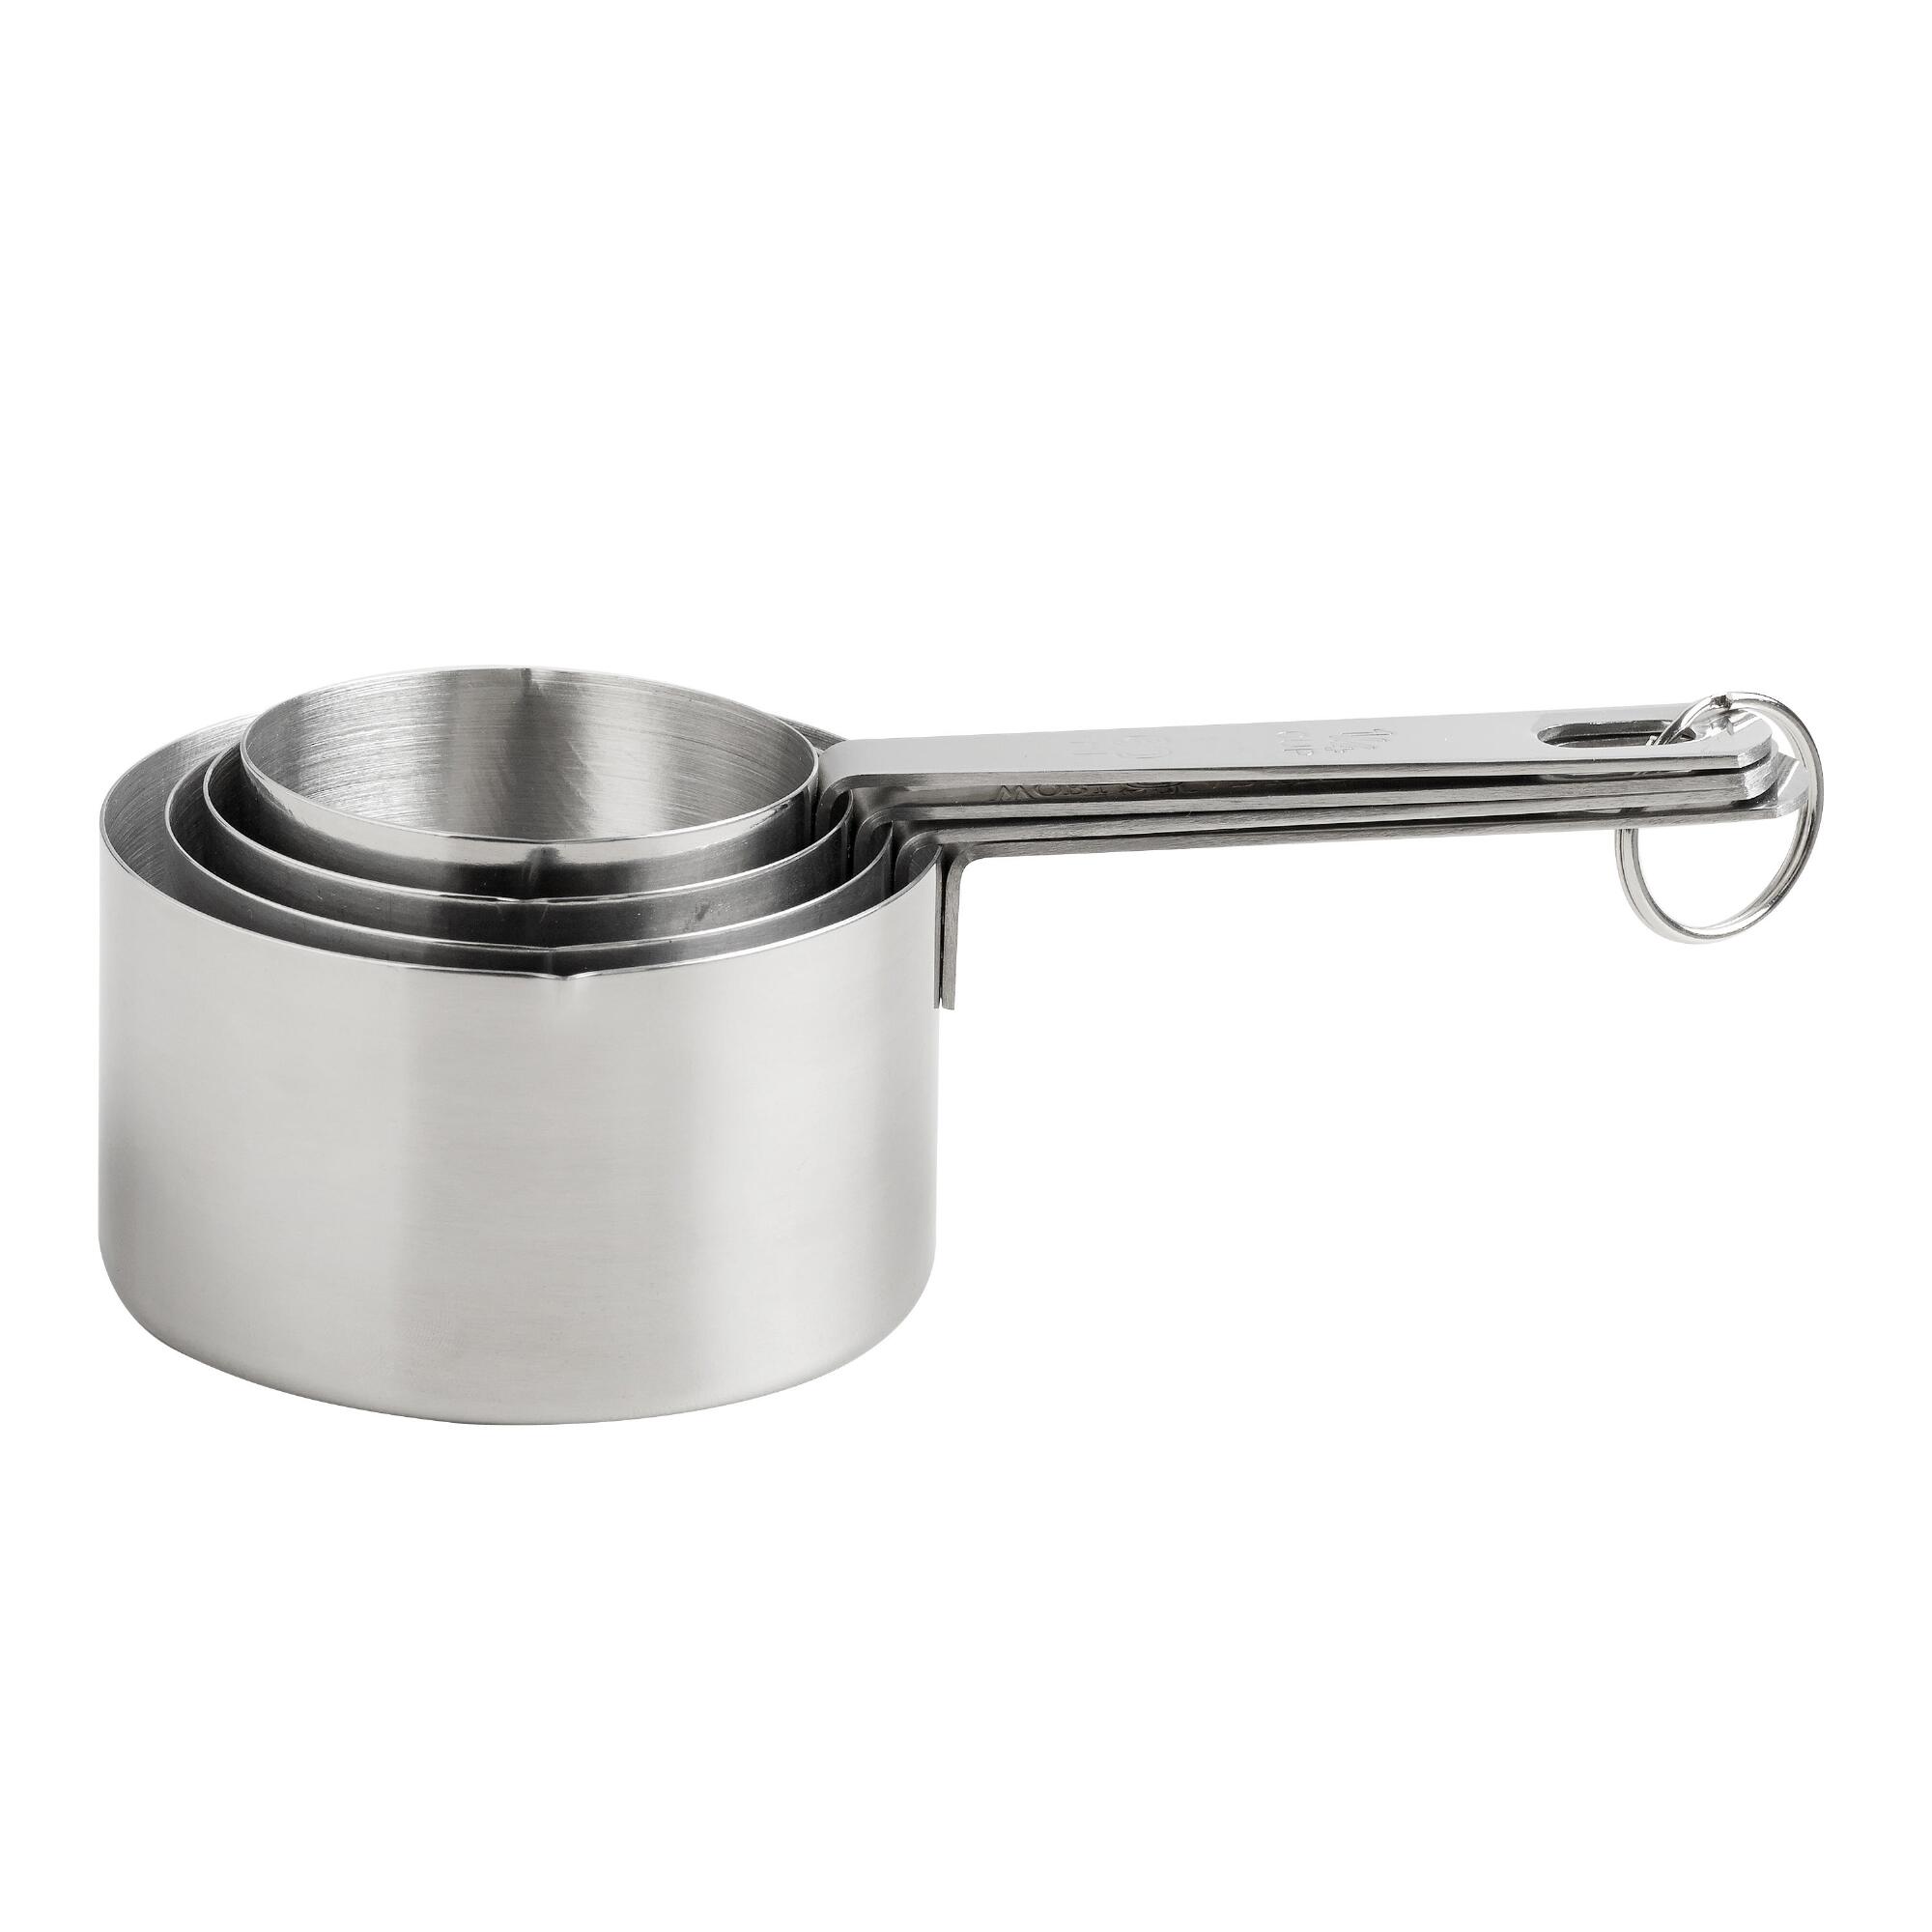 Stainless Steel Nesting Measuring Cup Set: Silver by World Market